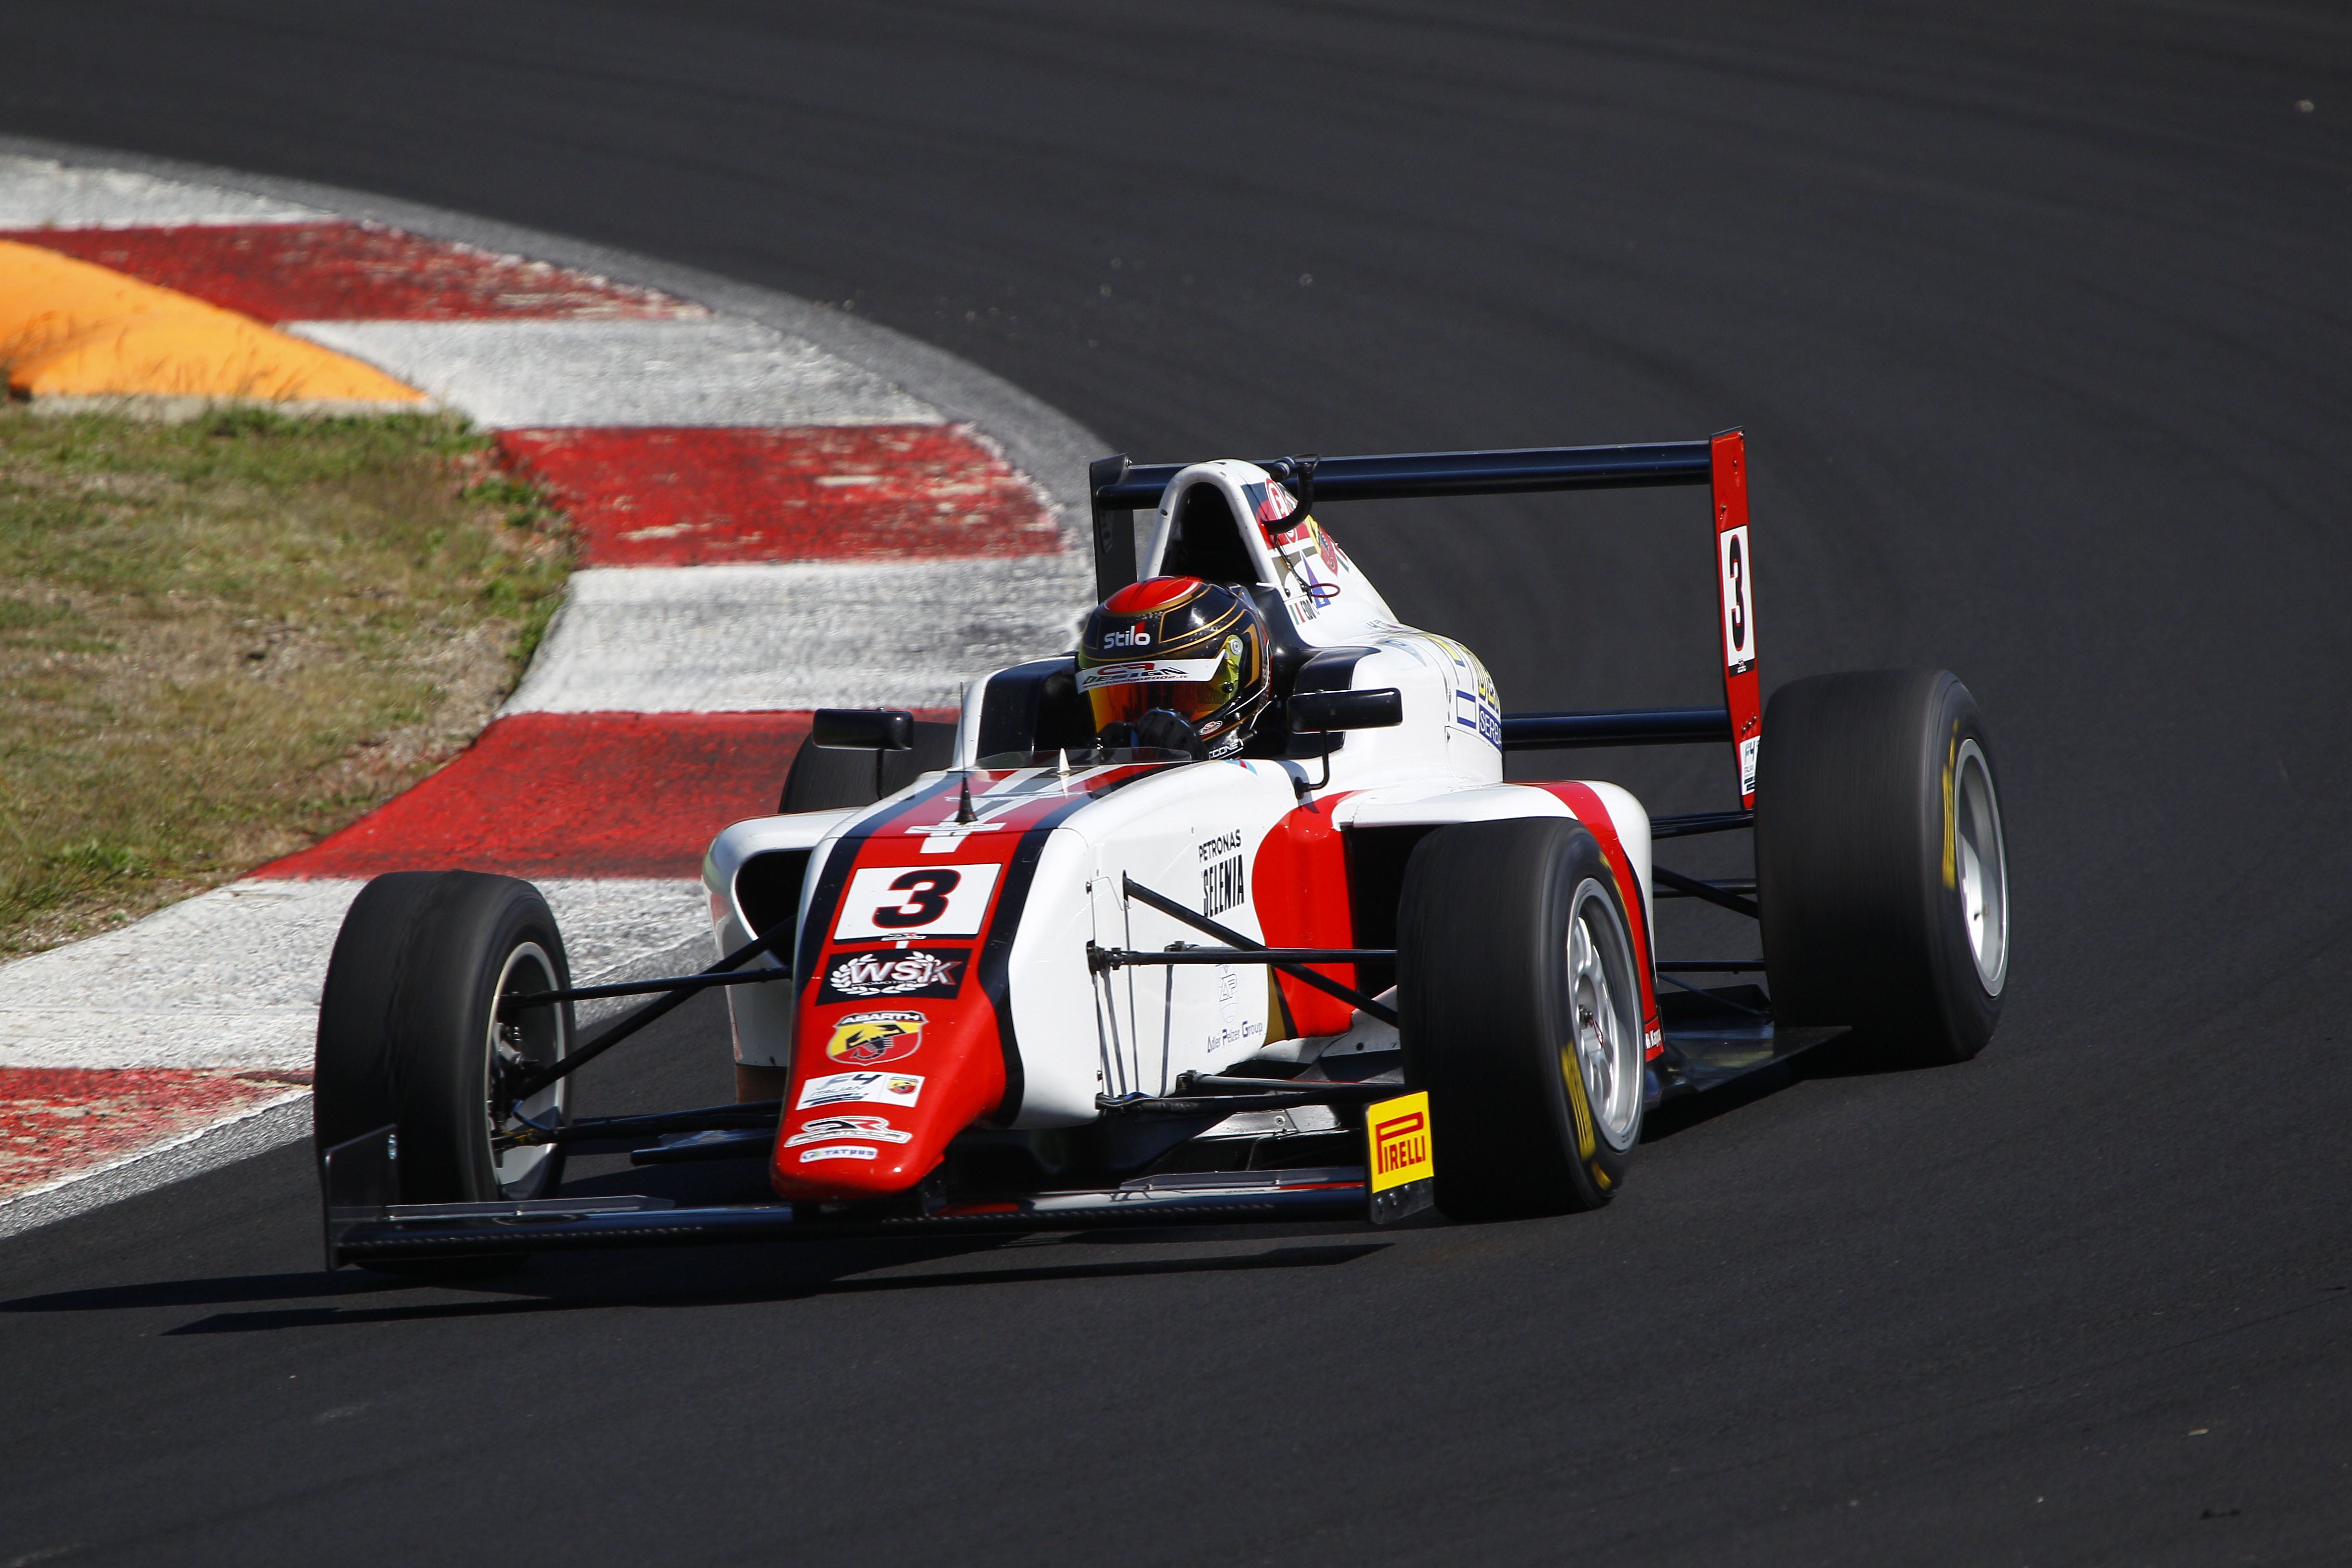 DR Formula’s Morricone pleased with progress at Vallelunga F4 